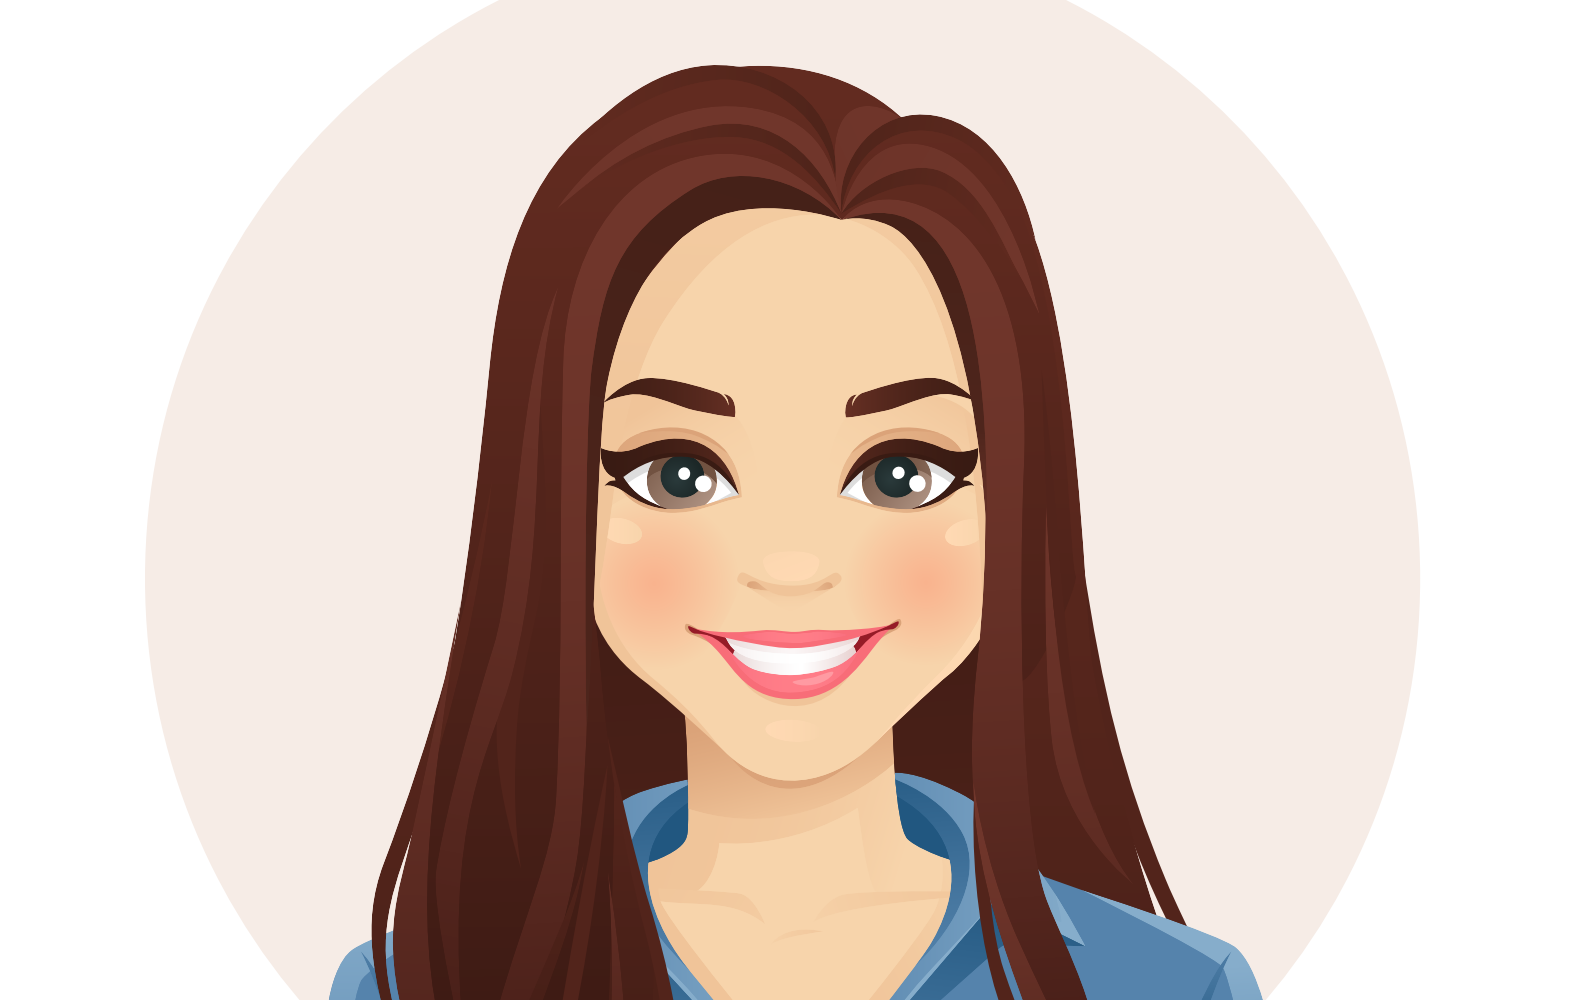 16 different digital artwork avatars of smiling people who look professional and casual.